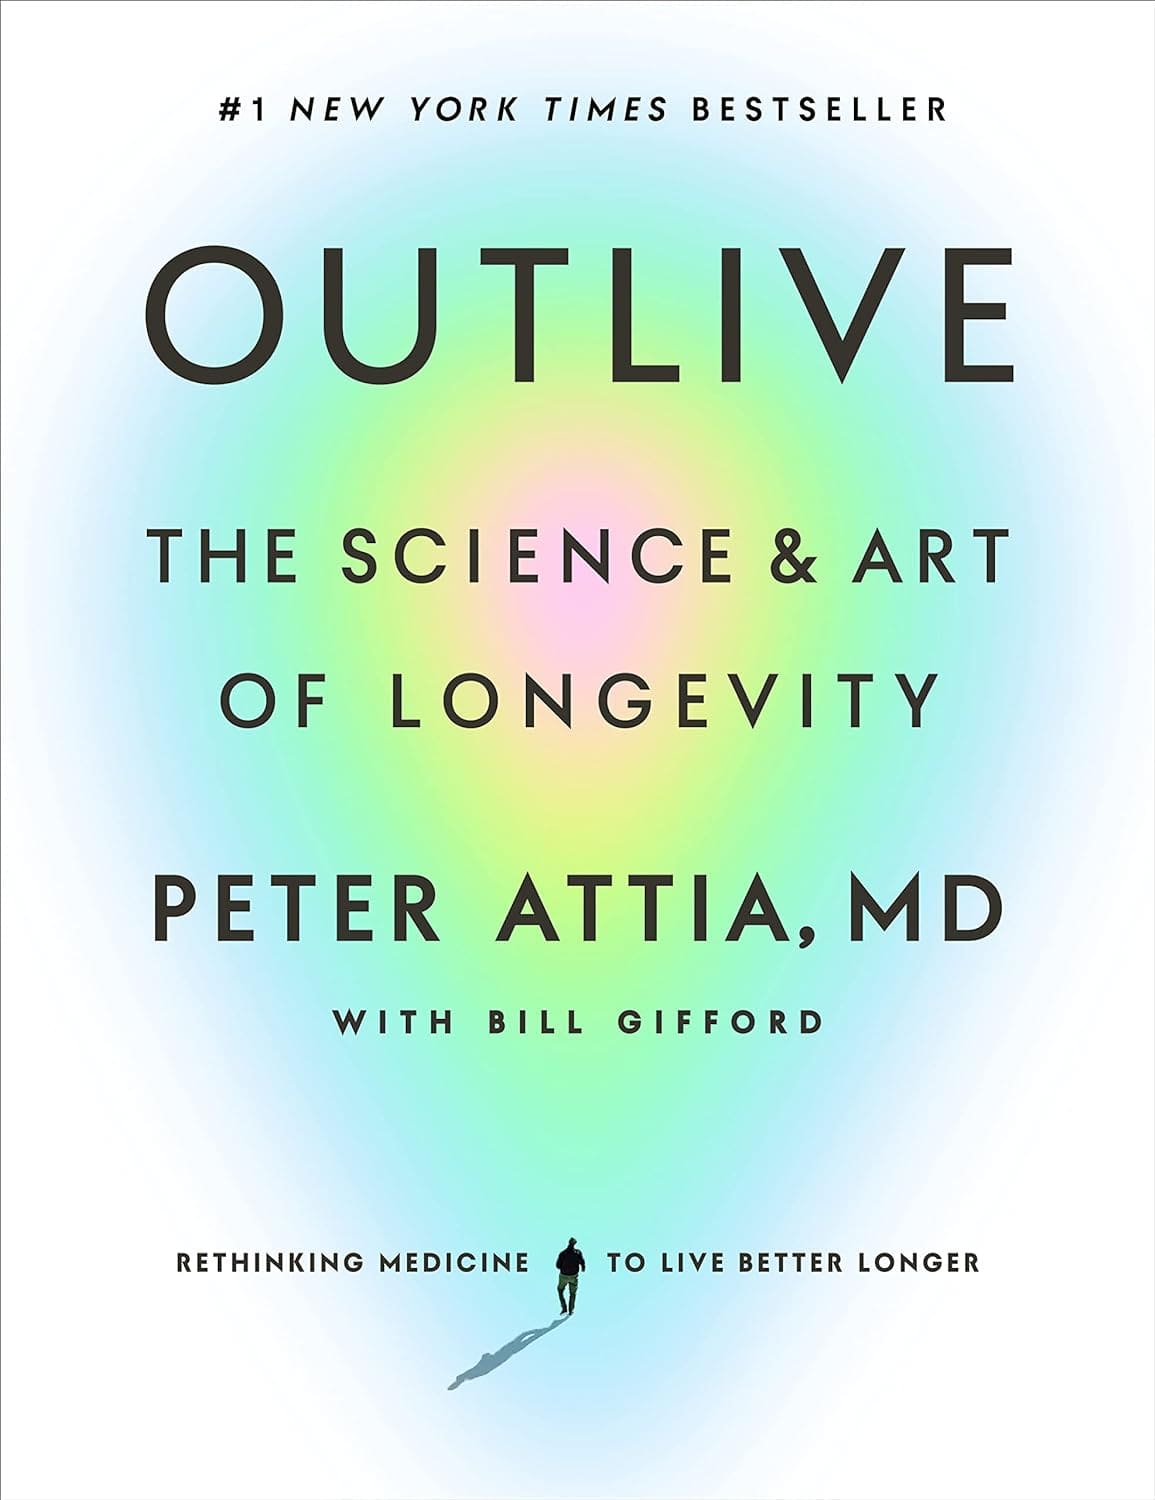 Outlive Book By Bill Gifford